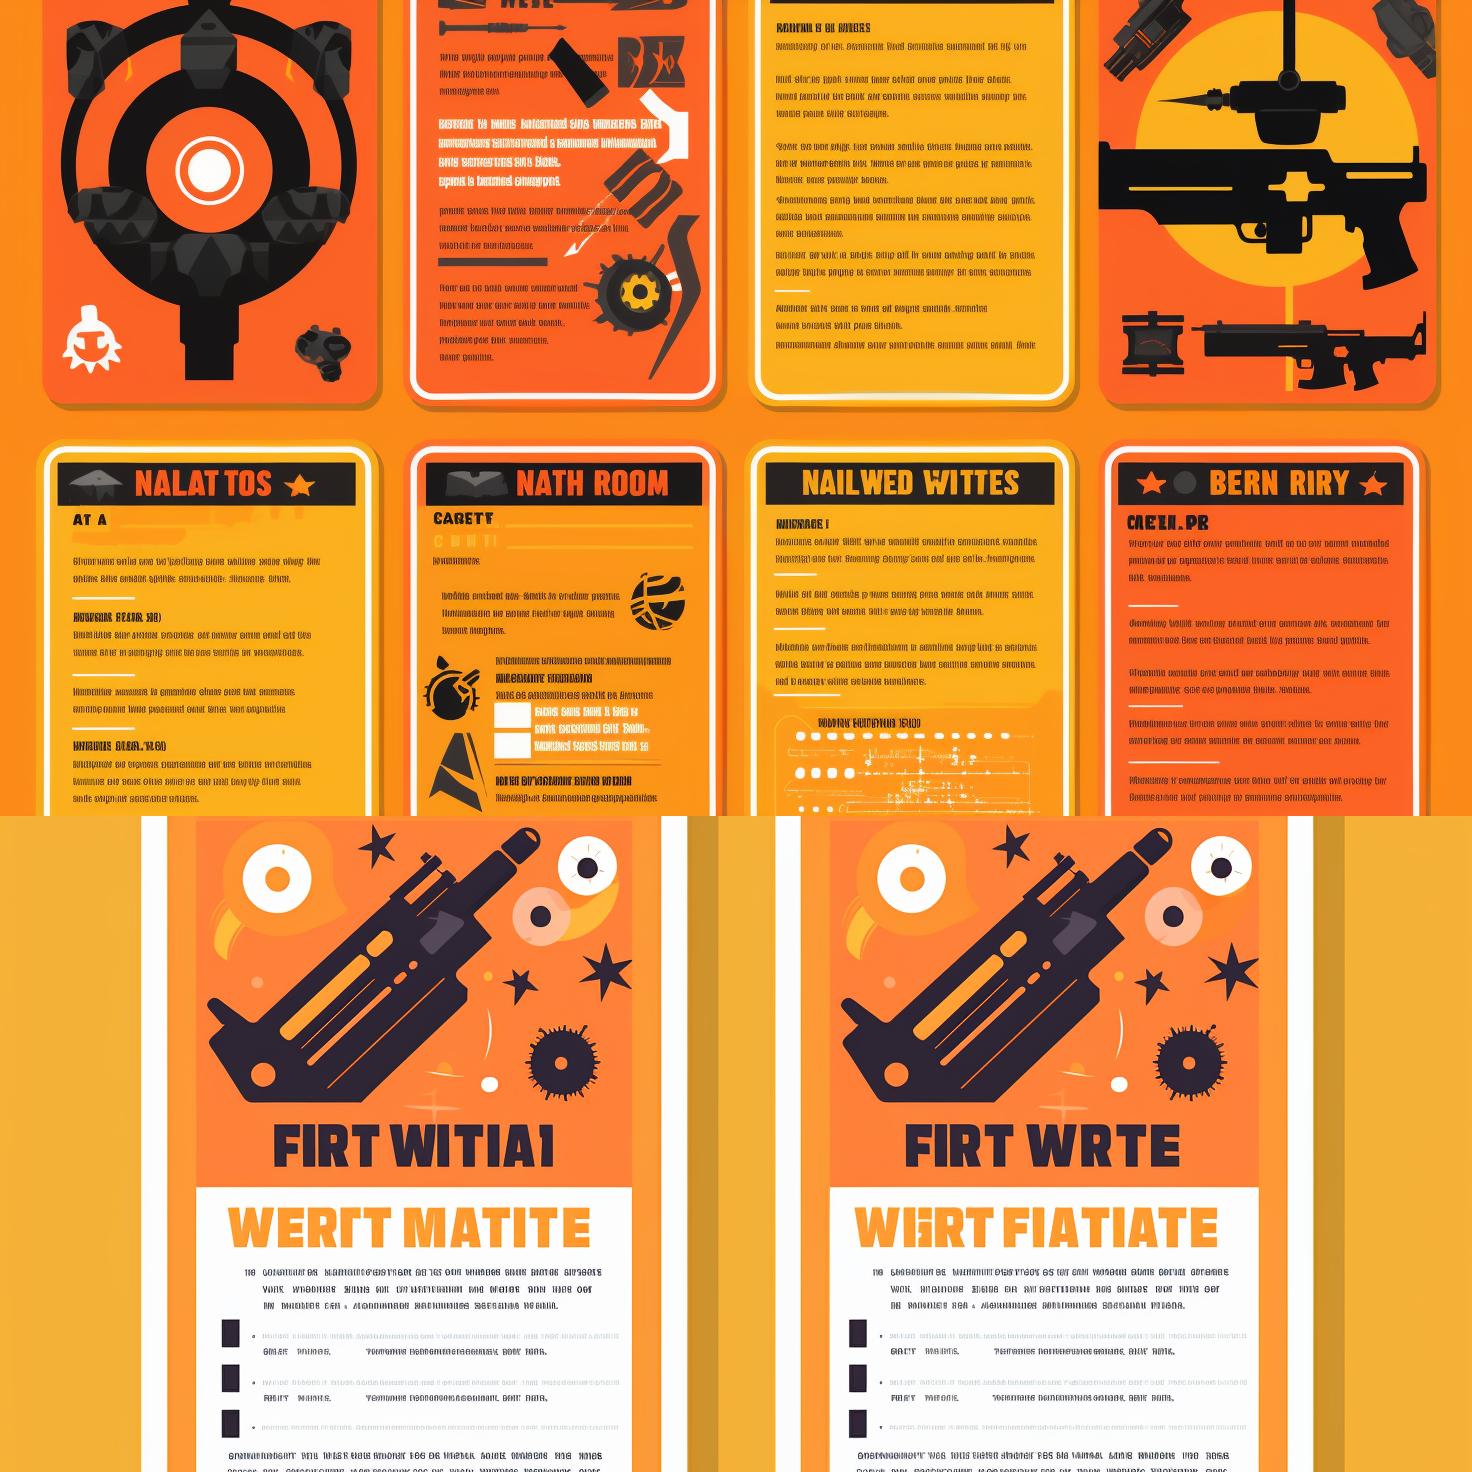 A set of printed Nerf war party rules